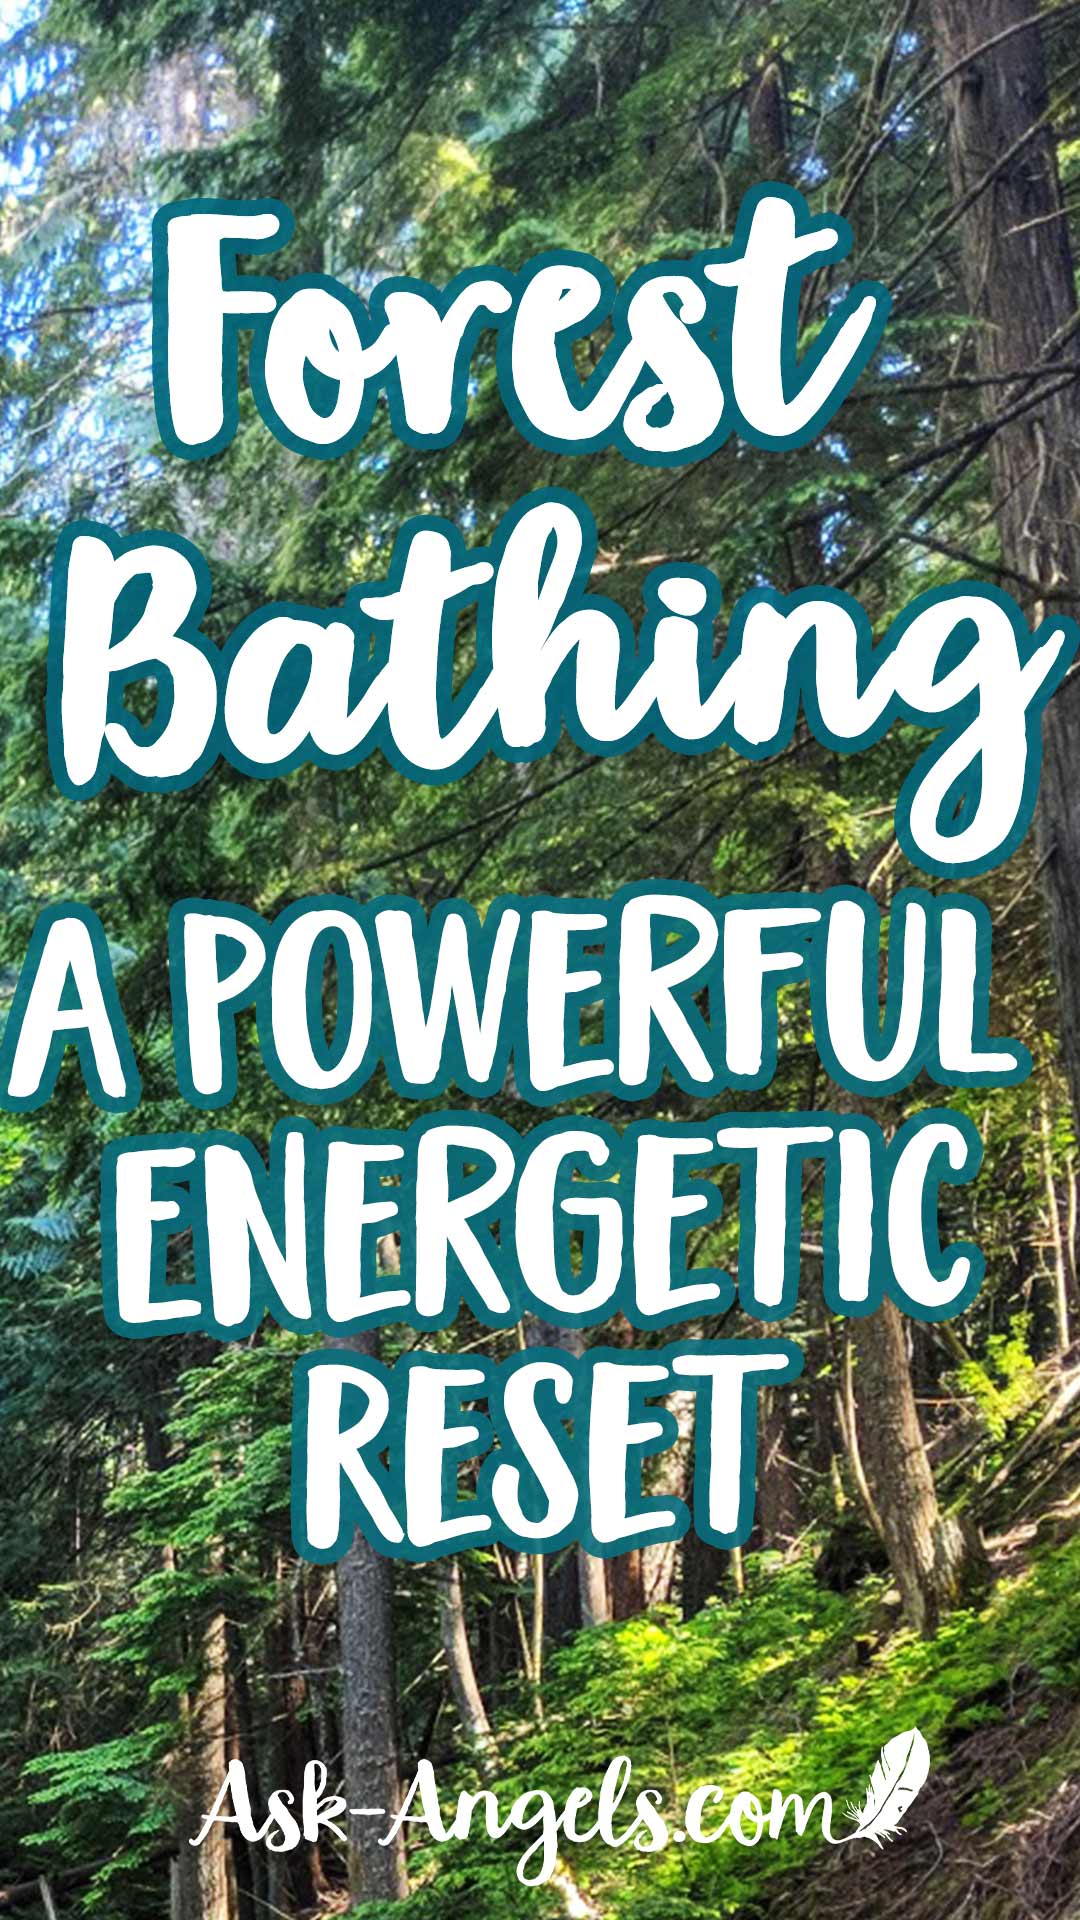 Forest Bathing – A Powerful Energetic Reset!